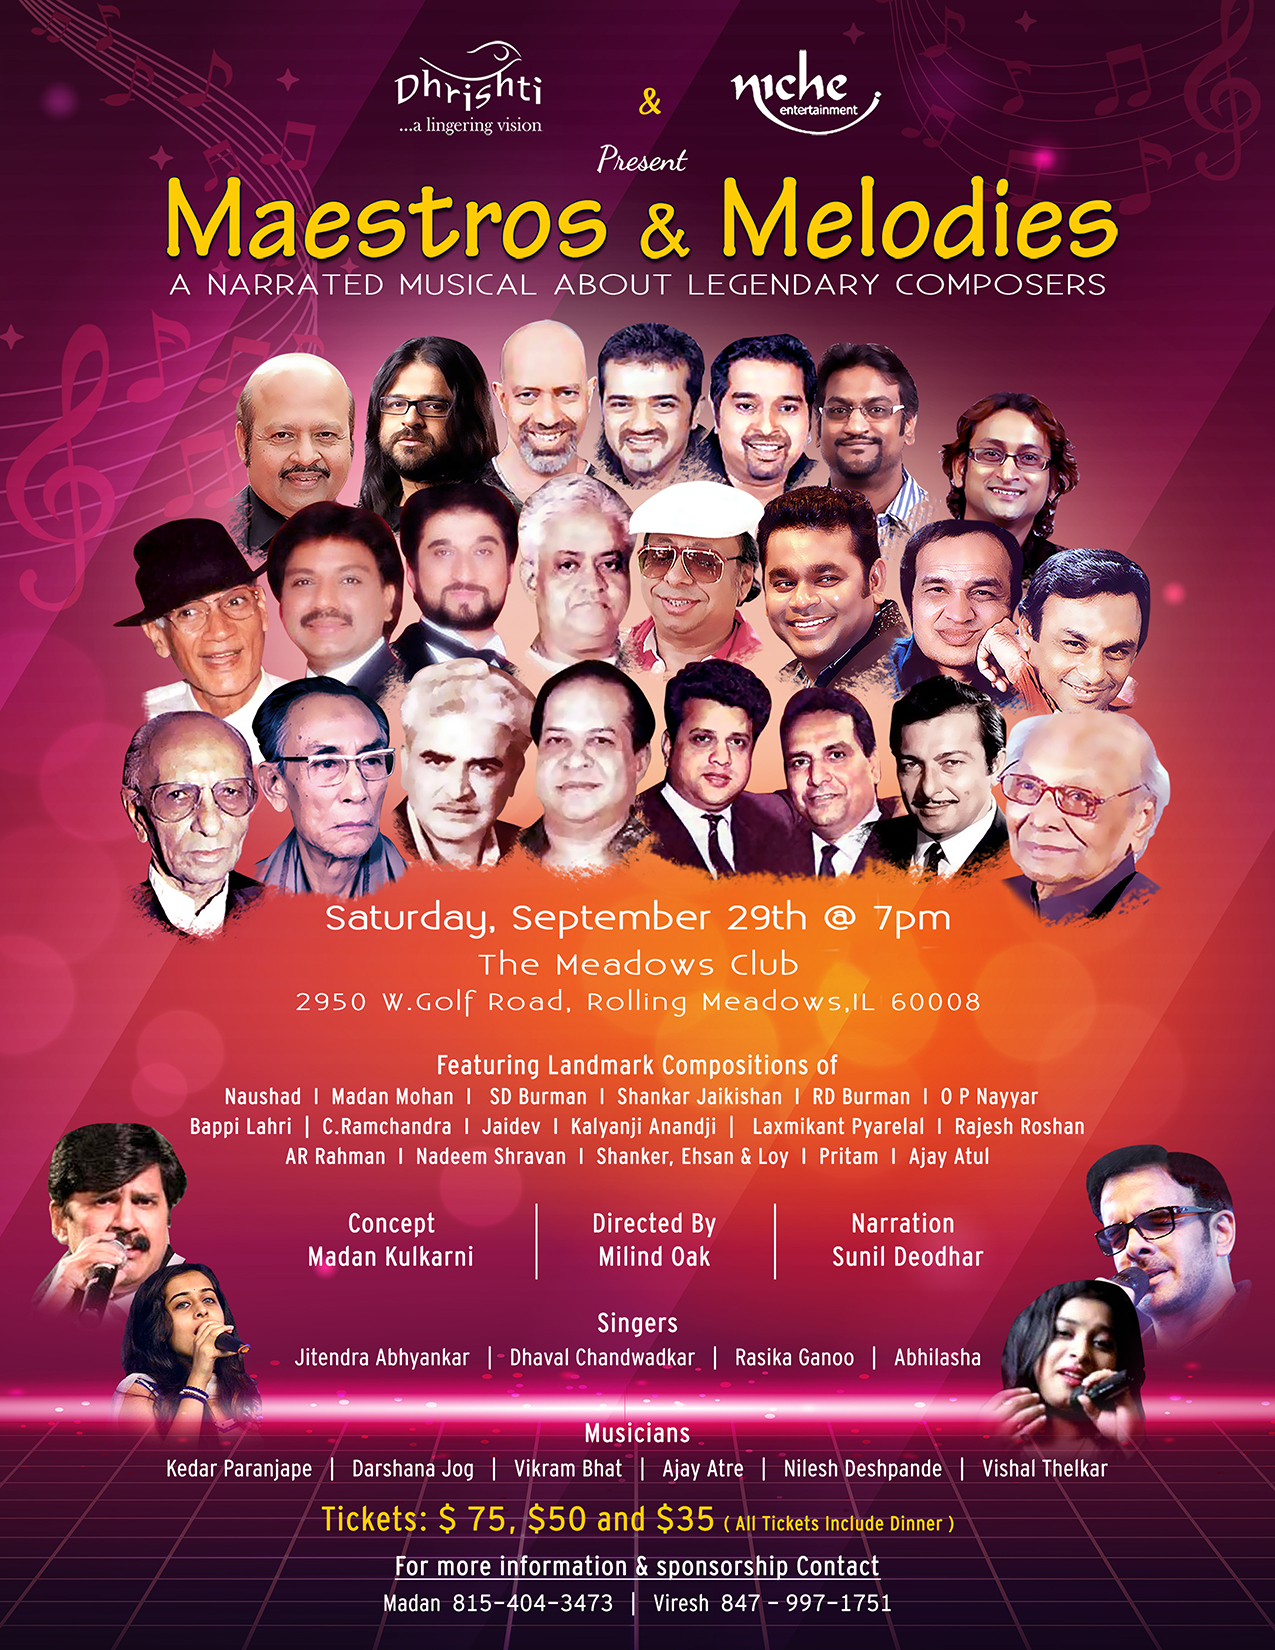 Master & Melodies...A Narrated Musical of Legendary Composers